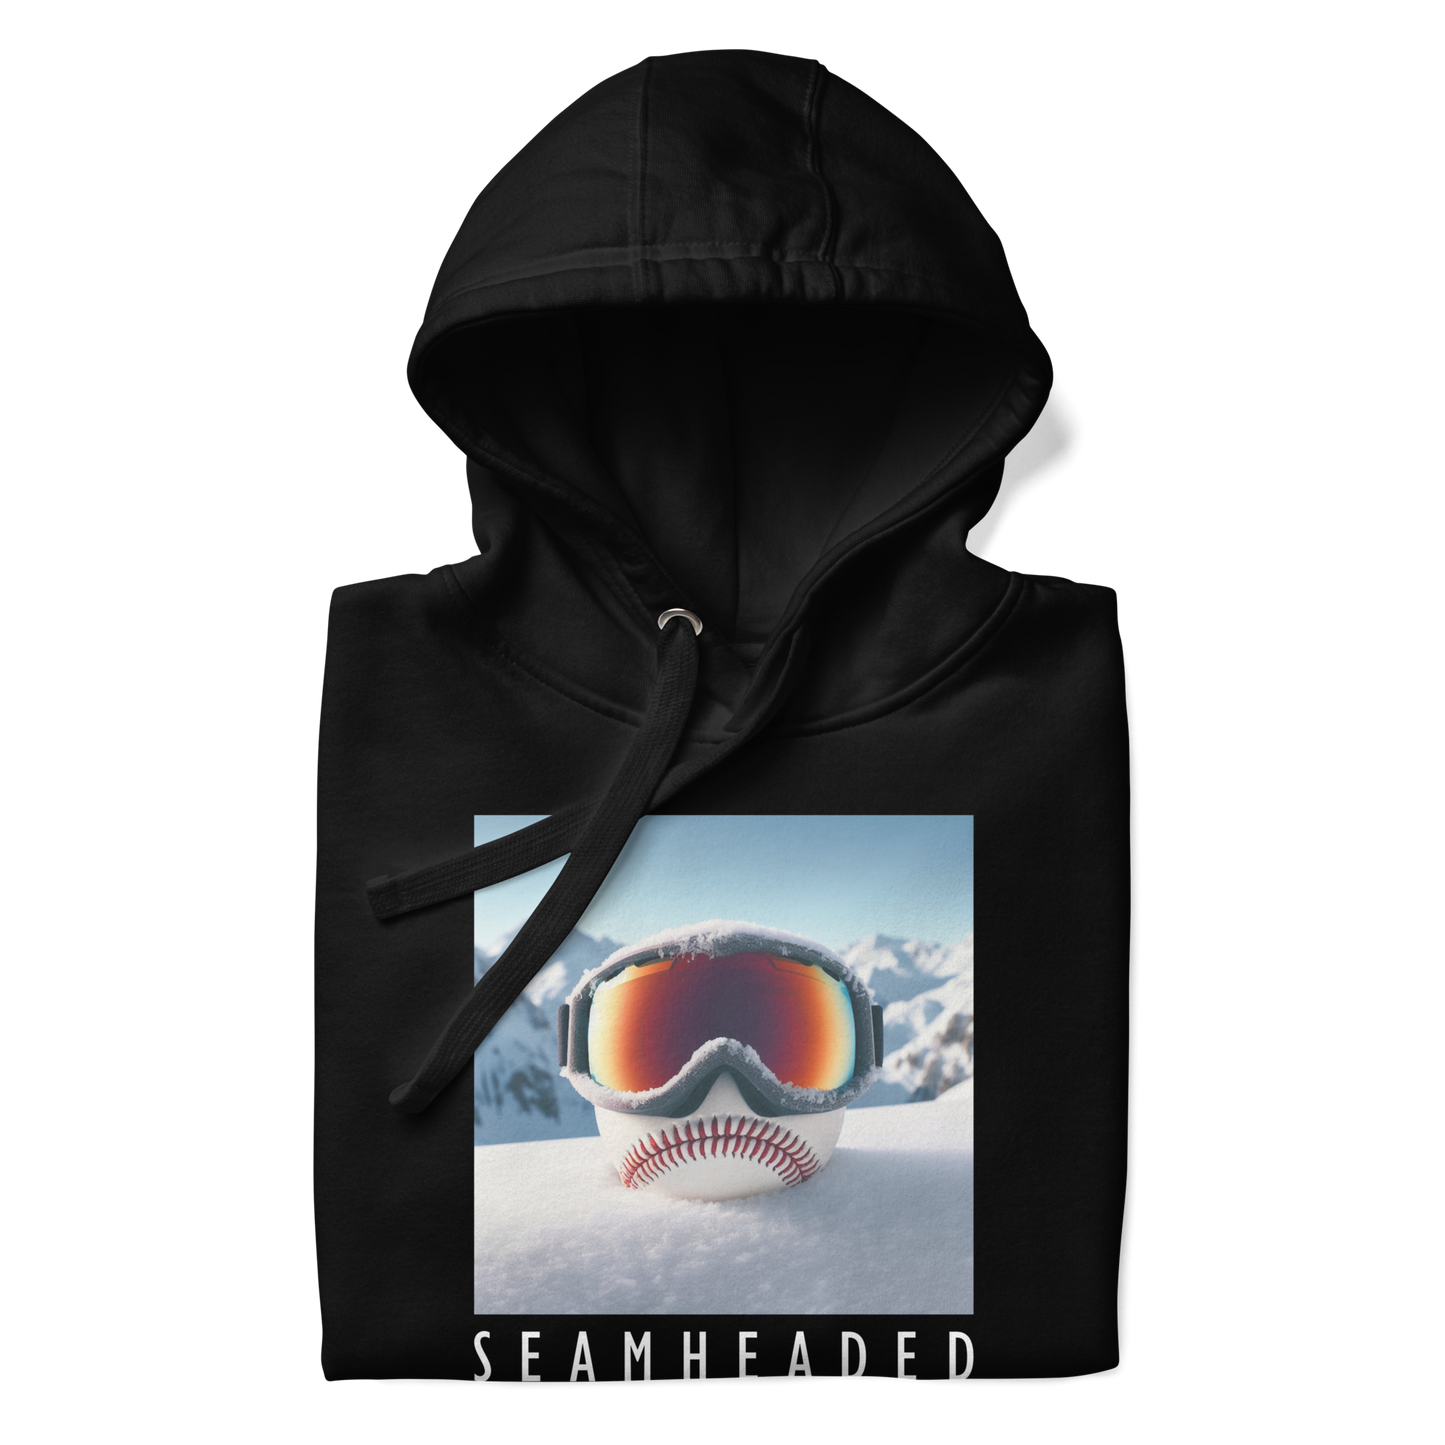 Winterball Hoodie from Seamheaded Apparel